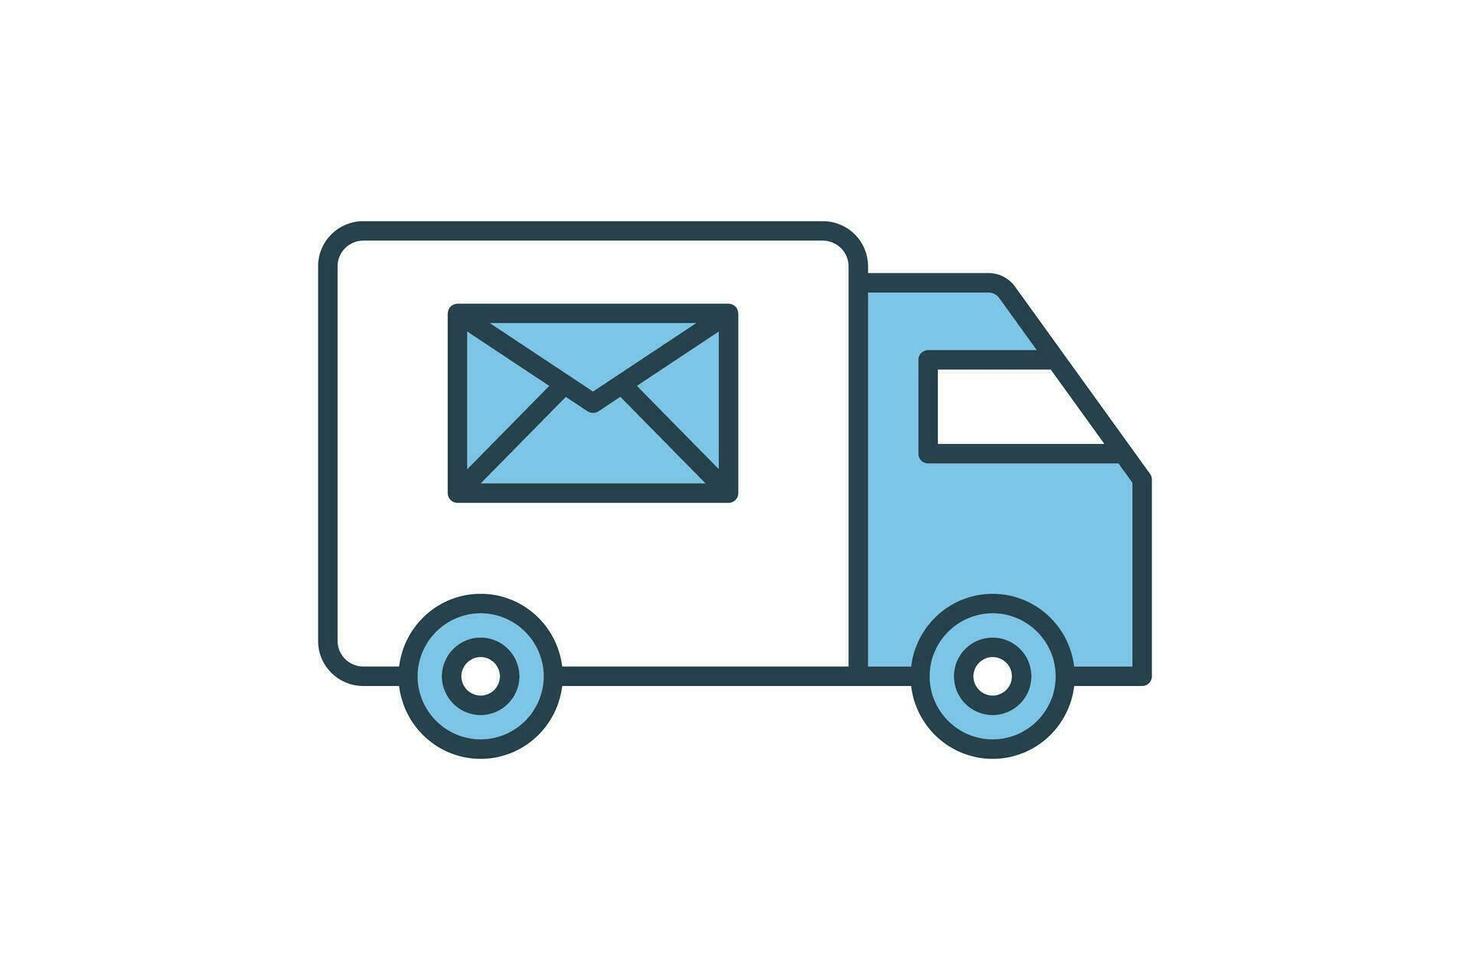 Email Delivery Icon. Icon related to Delivery. suitable for web site, app, user interfaces, printable etc. Flat line icon style. Simple vector design editable